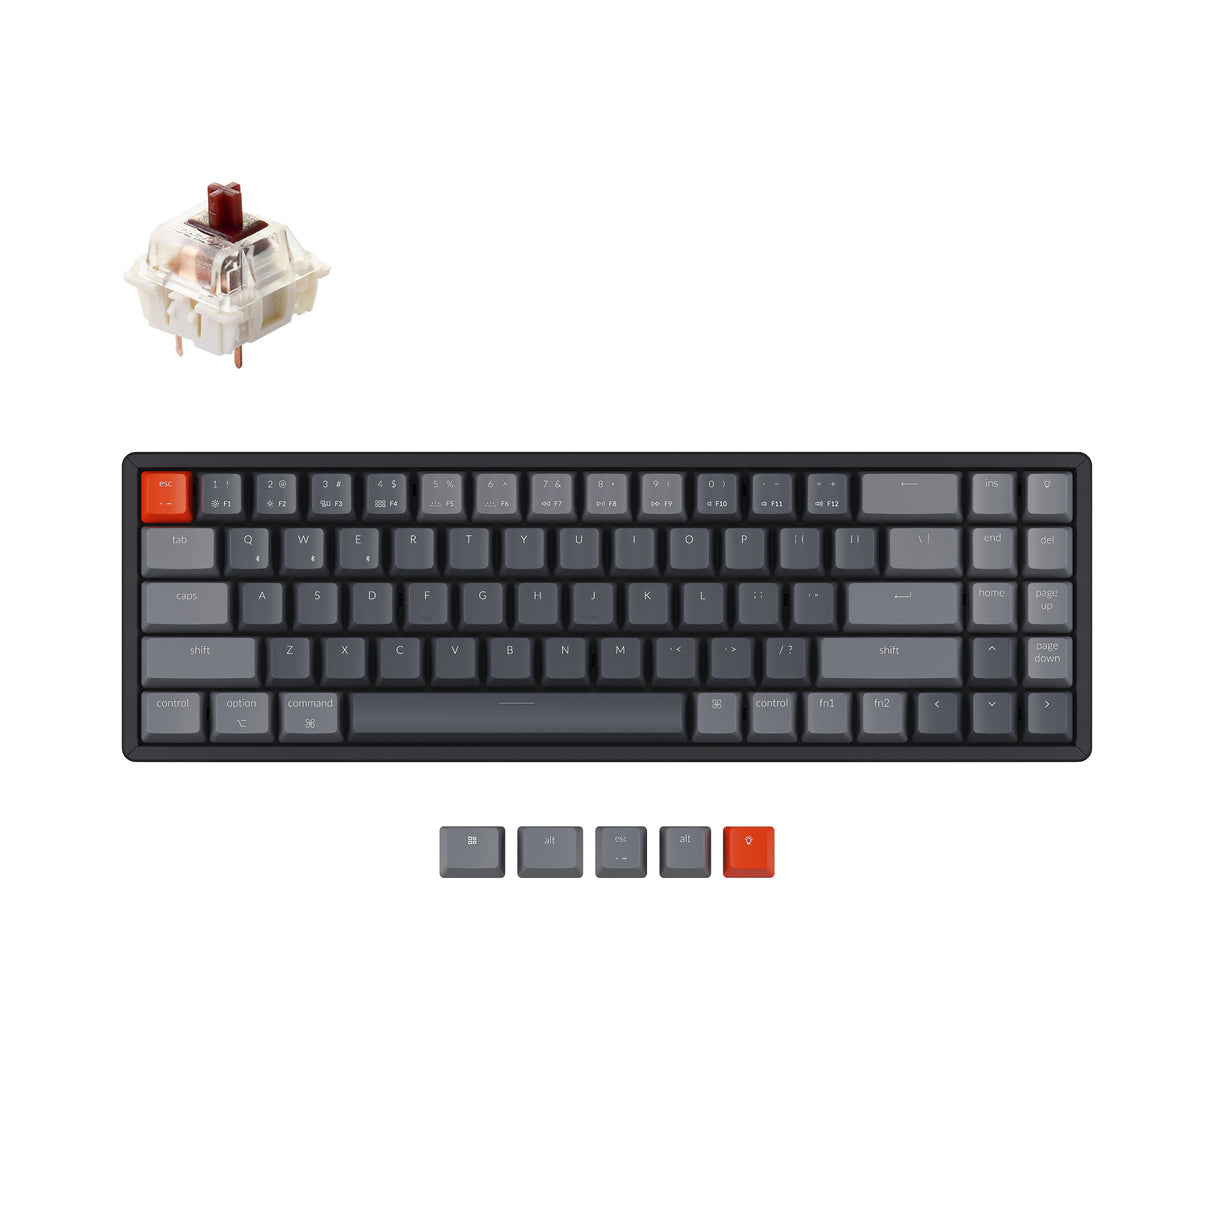 Keychron K14 70 percent layout aluminum wireless mechanical keyboard for Mac Windows with hot-swappable Gateron mechanical brown switches compatible with Cherry Kailh and Panda switches